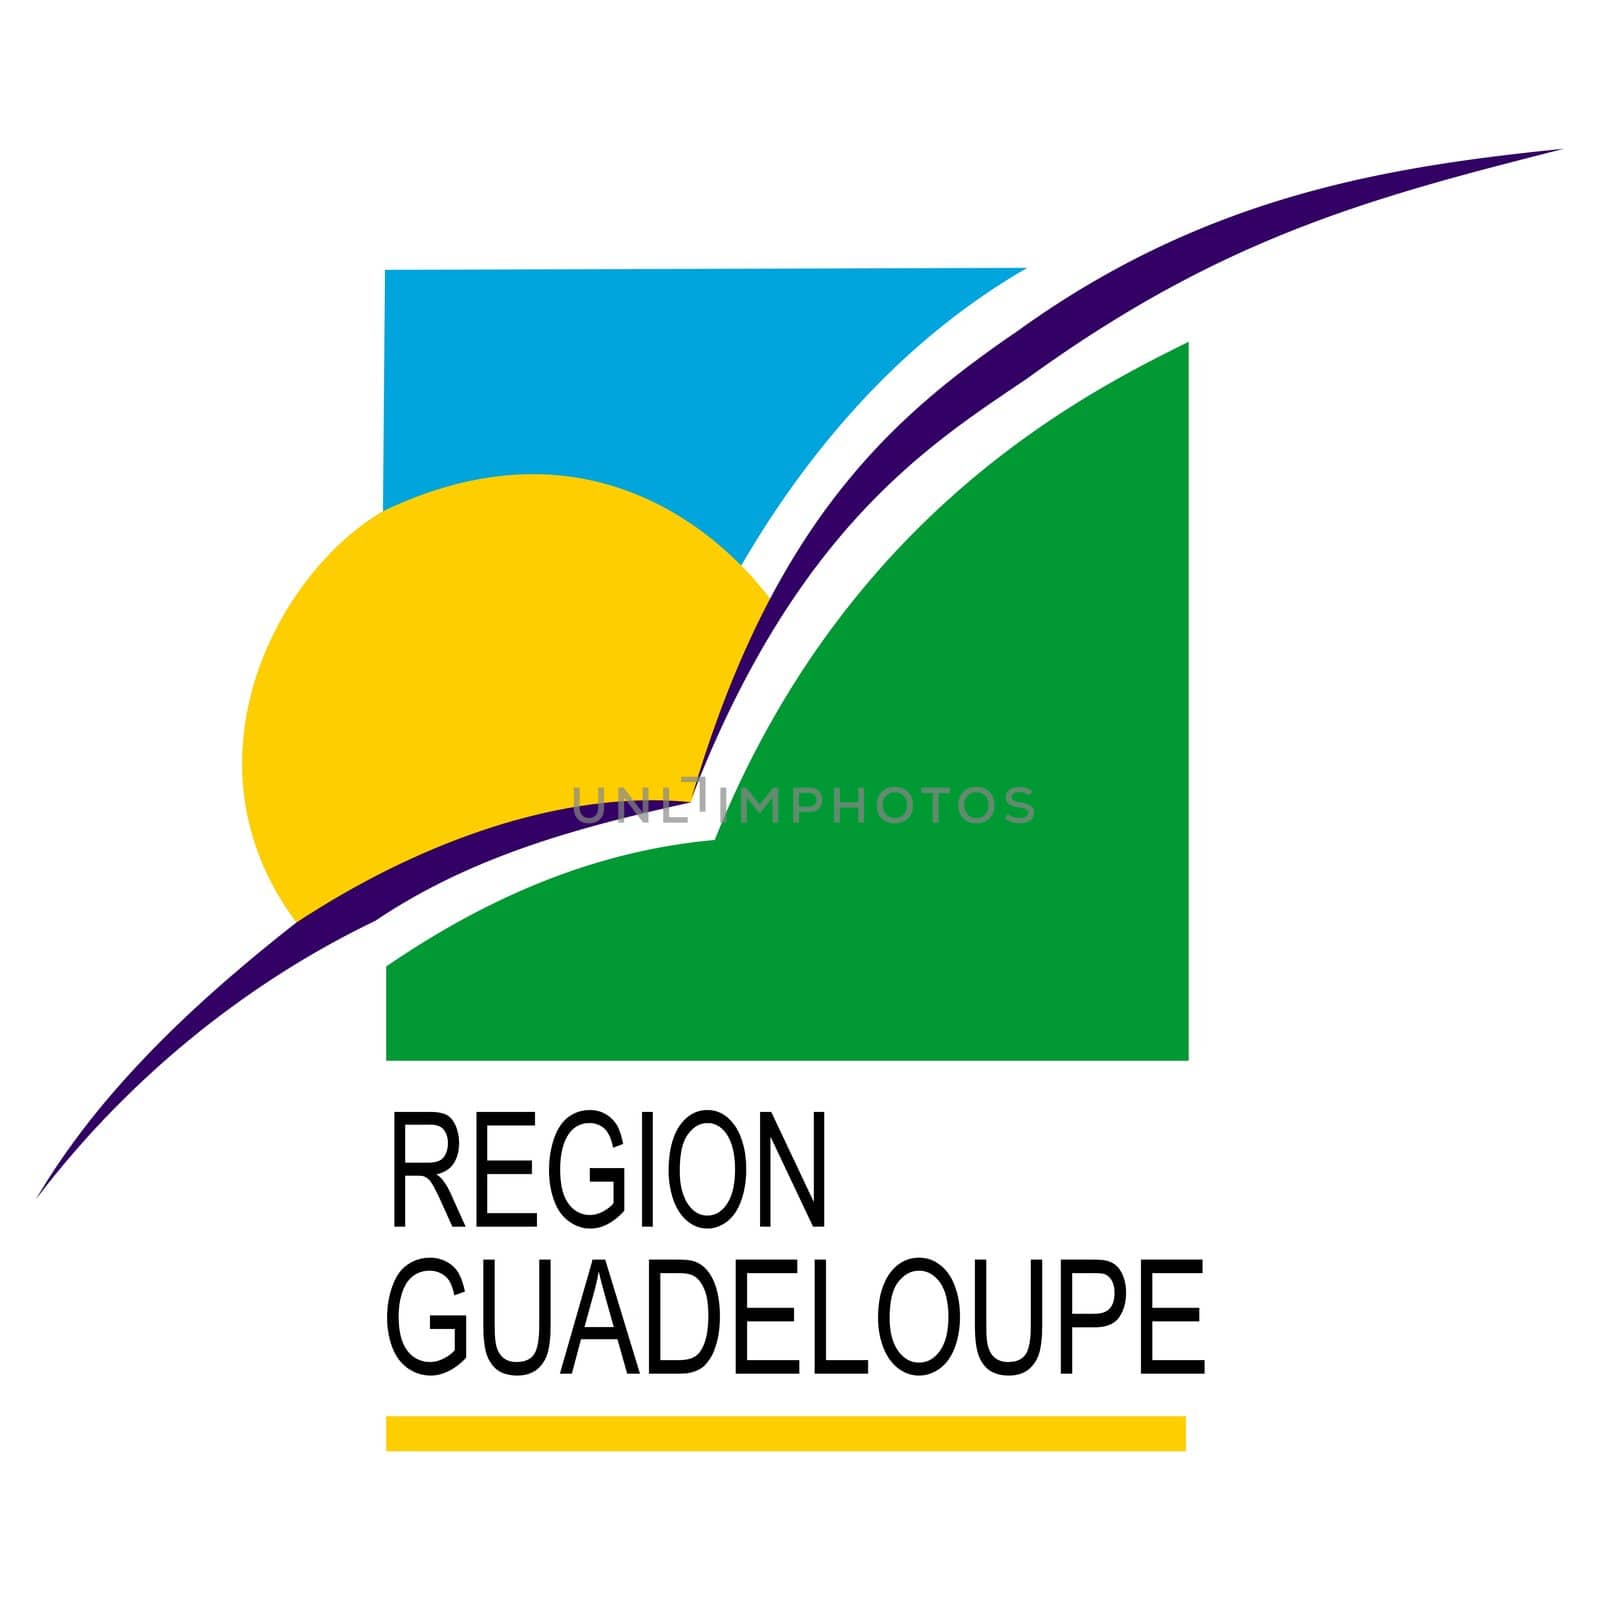 2D illustration of the flag of Region Guadeloupe